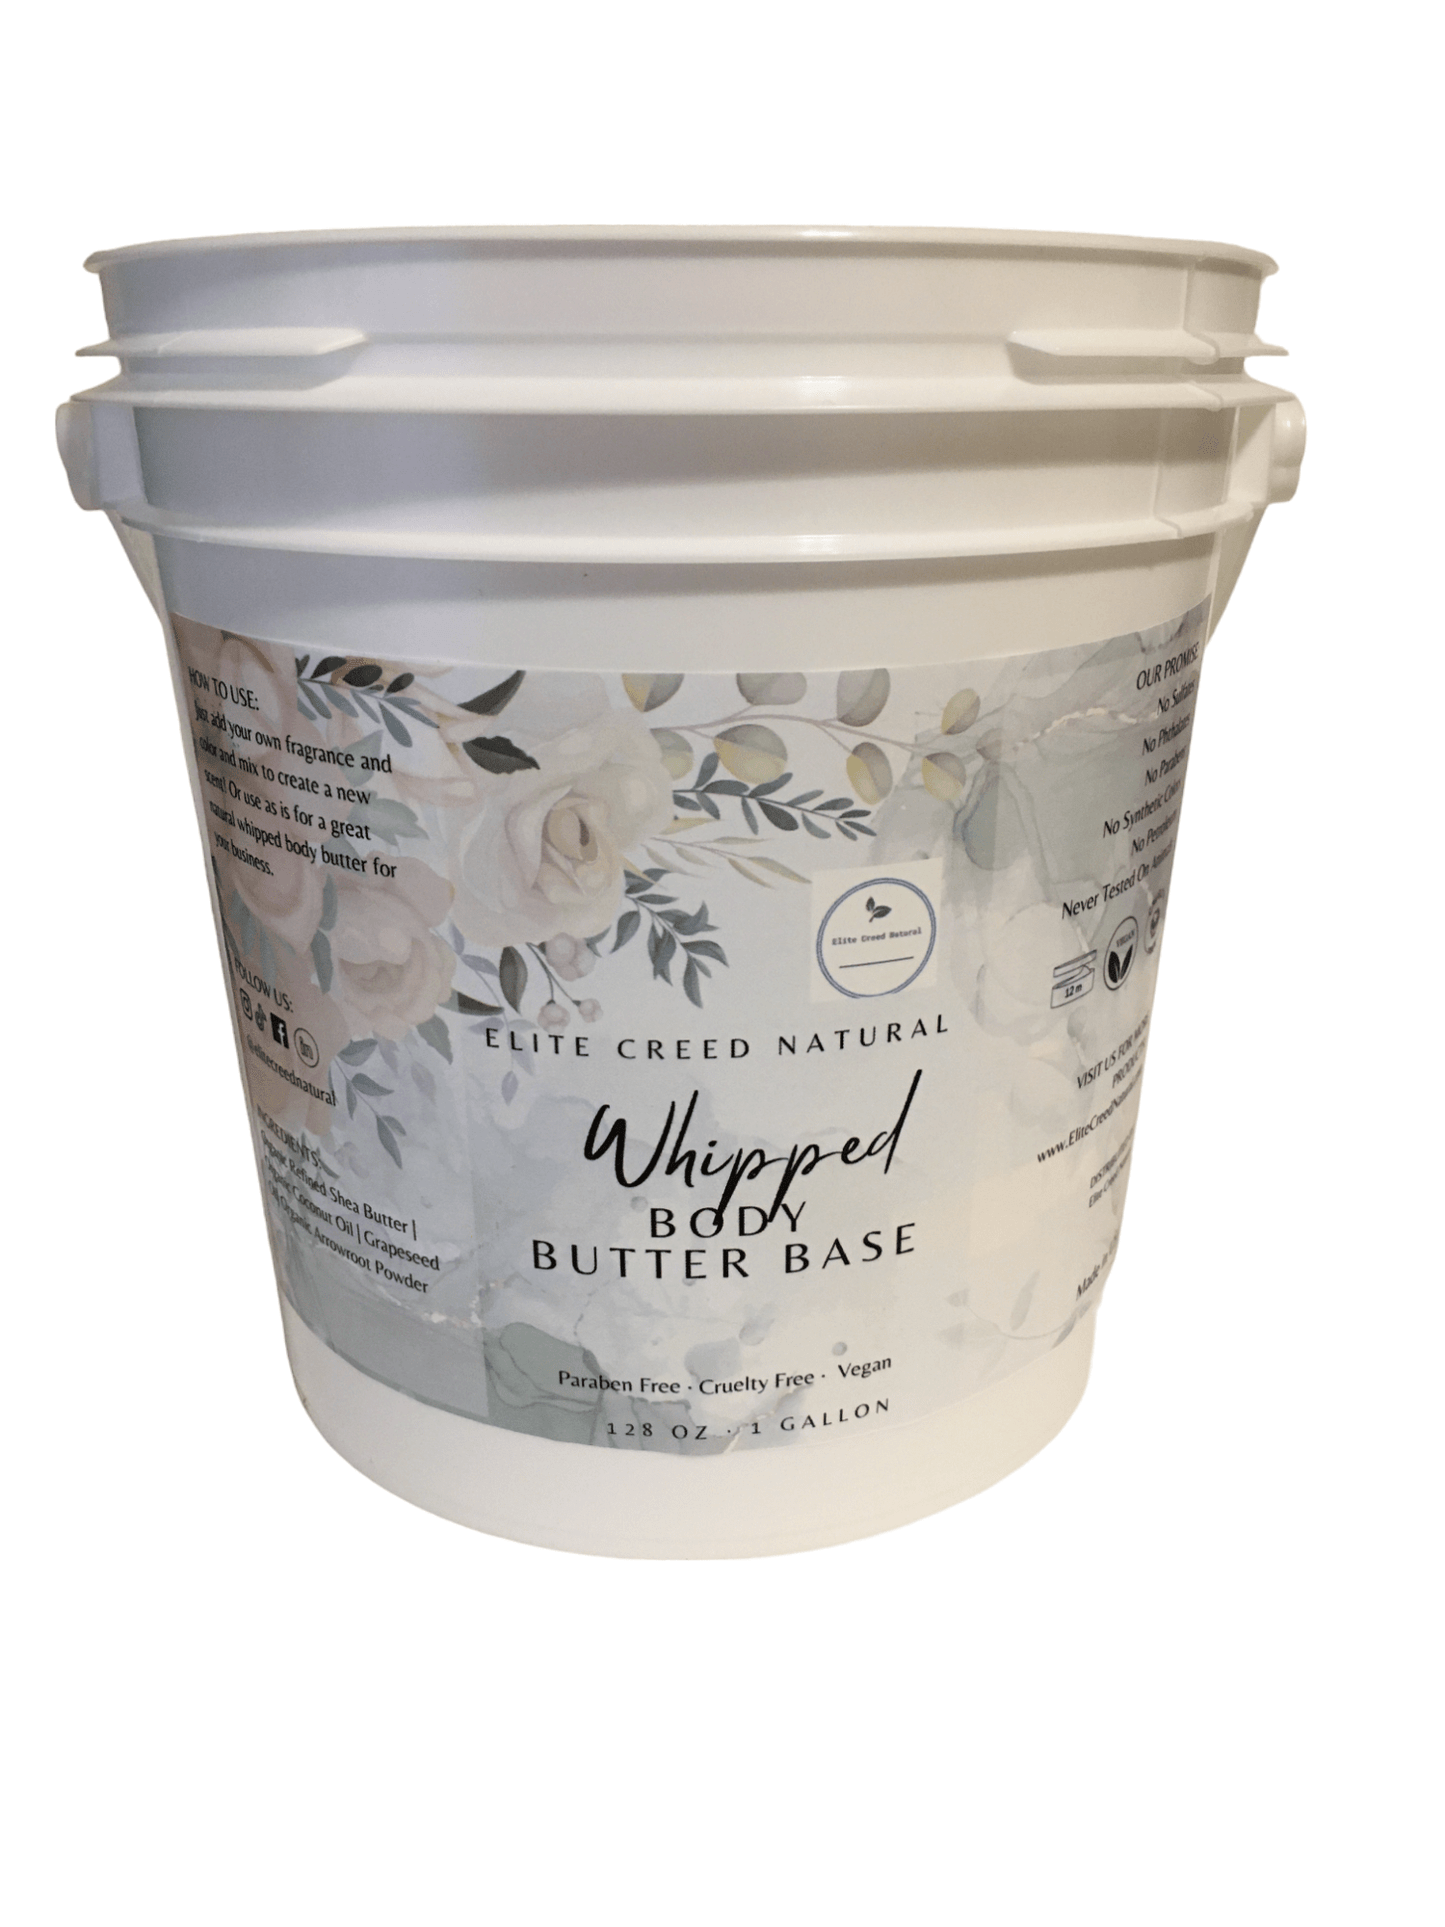 Wholesale Whipped Body Butter Base - Elite Creed Natural